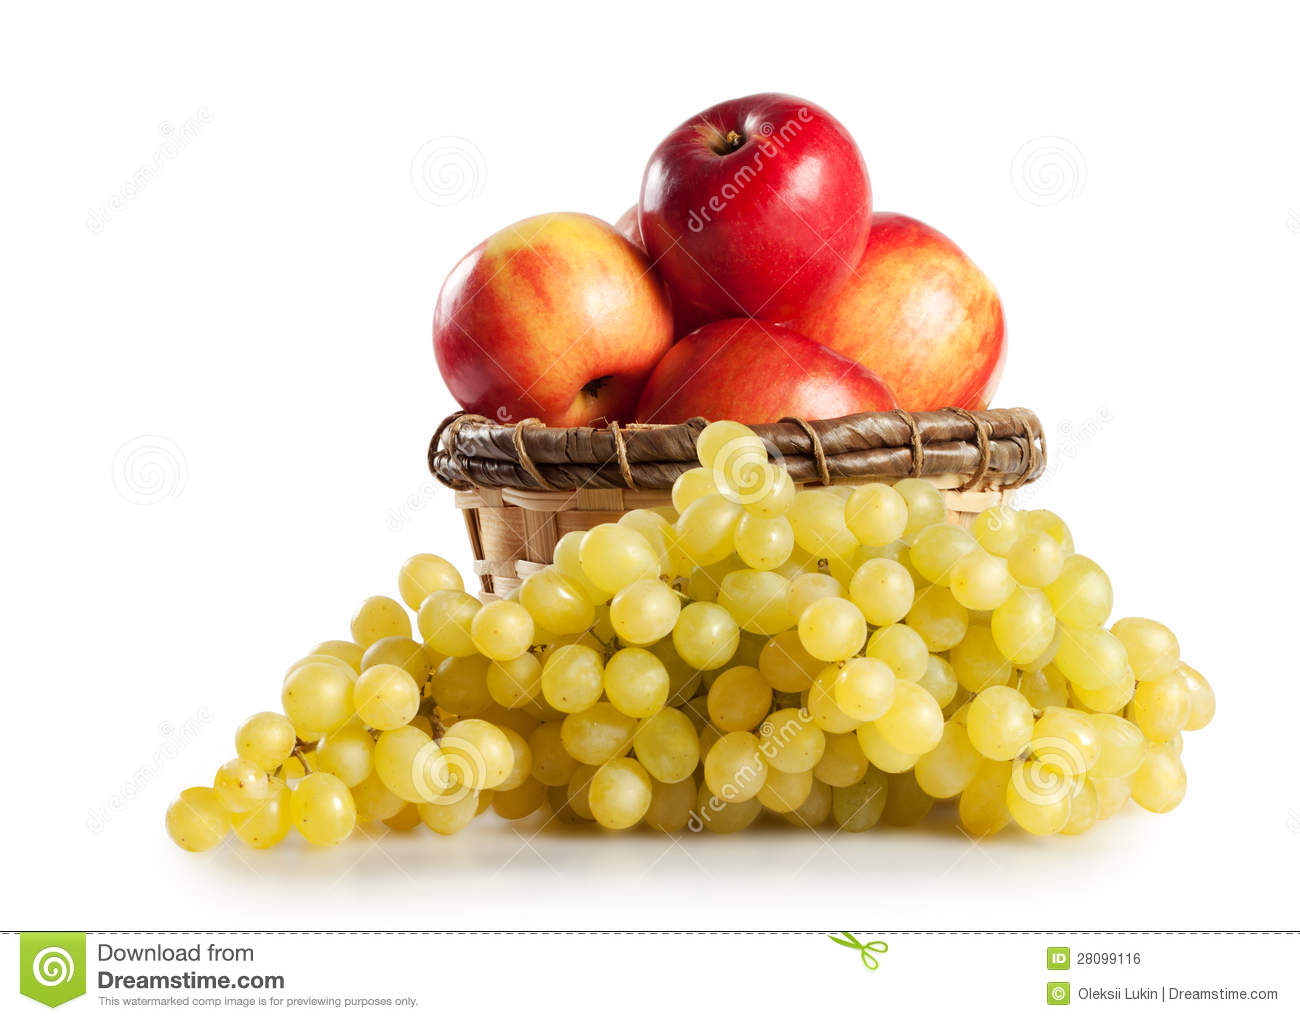 Grapes And Apples In A Basket Royalty Free Stock Image   Image    